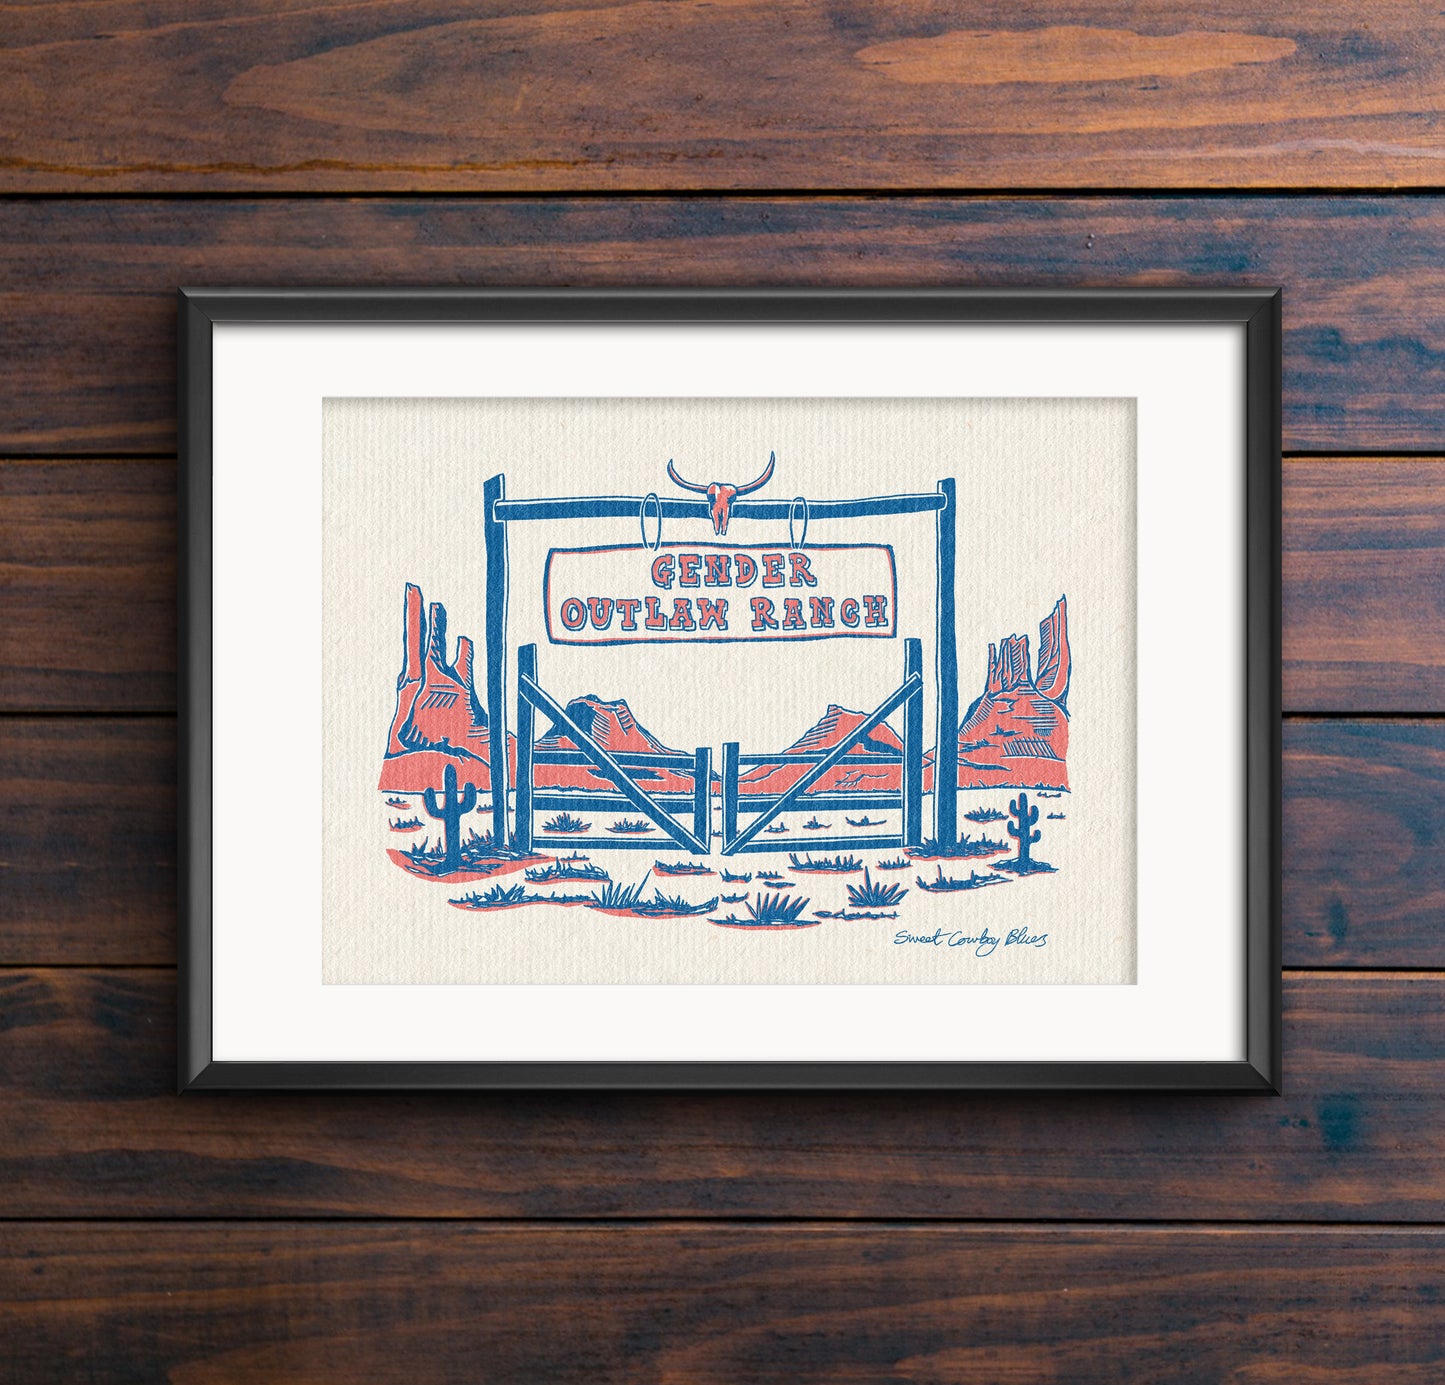 Gender Outlaw Ranch Print